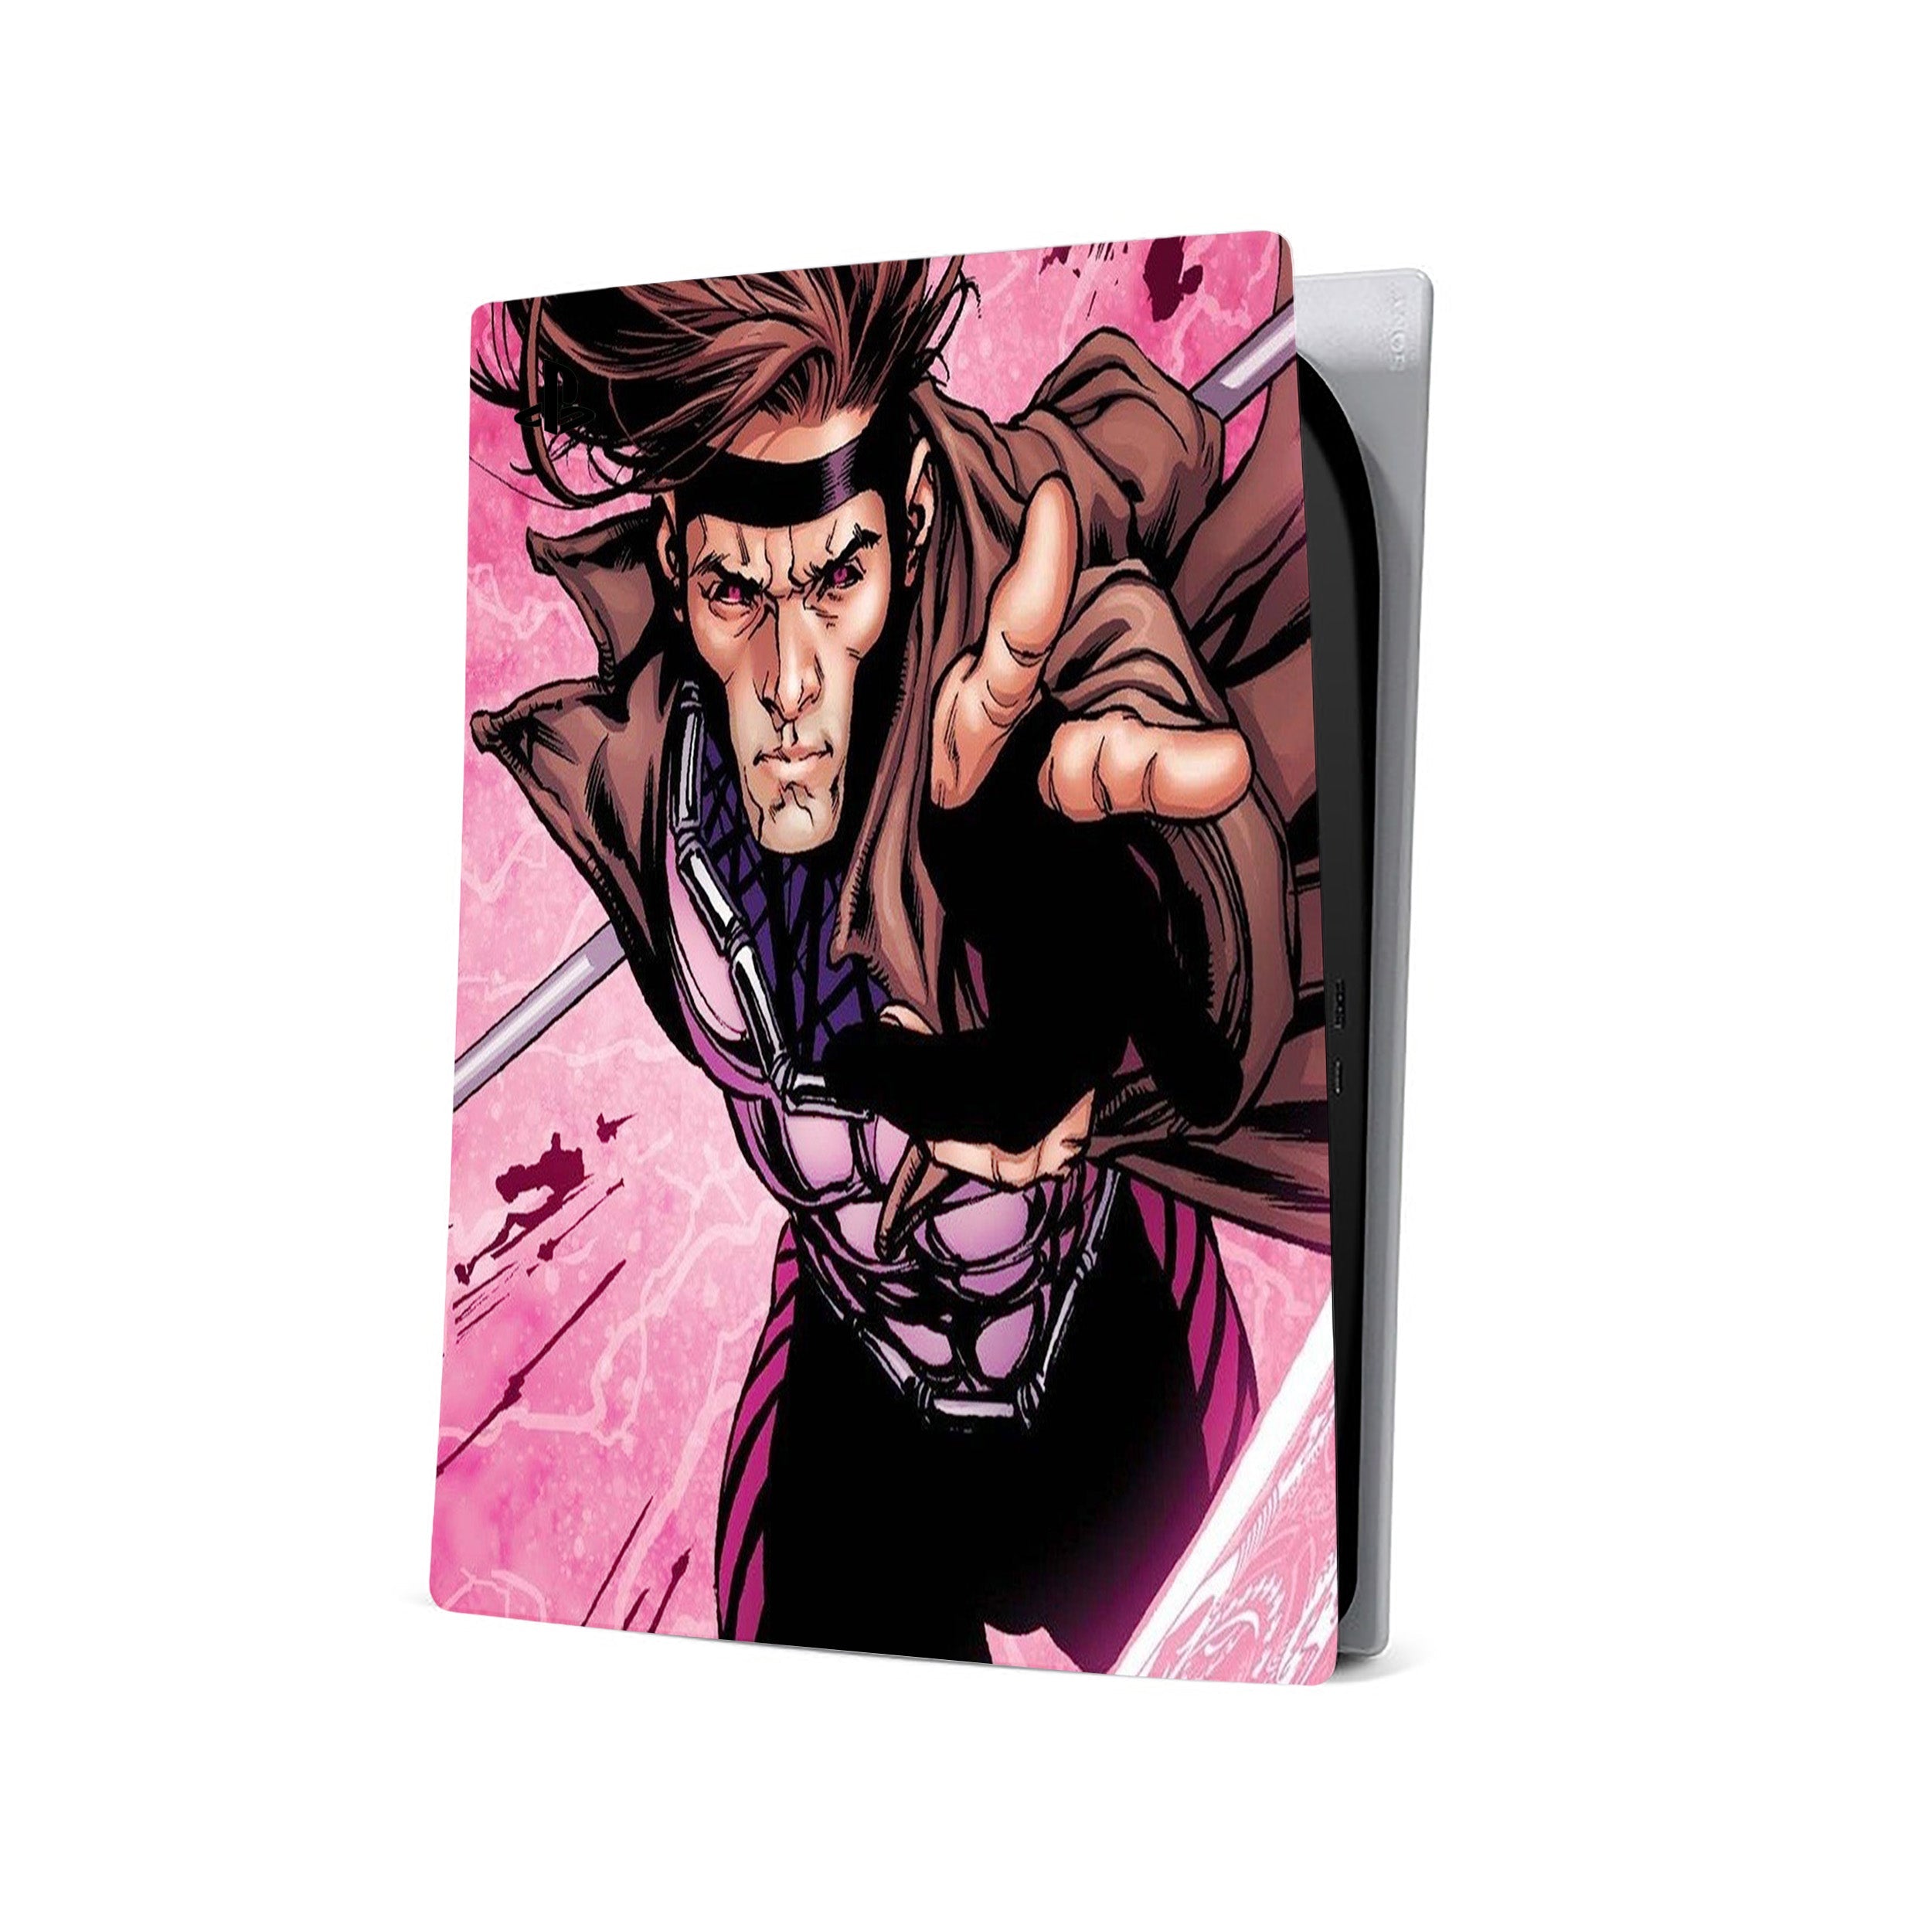 A video game skin featuring a Marvel Comics X Men Gambit design for the PS5.